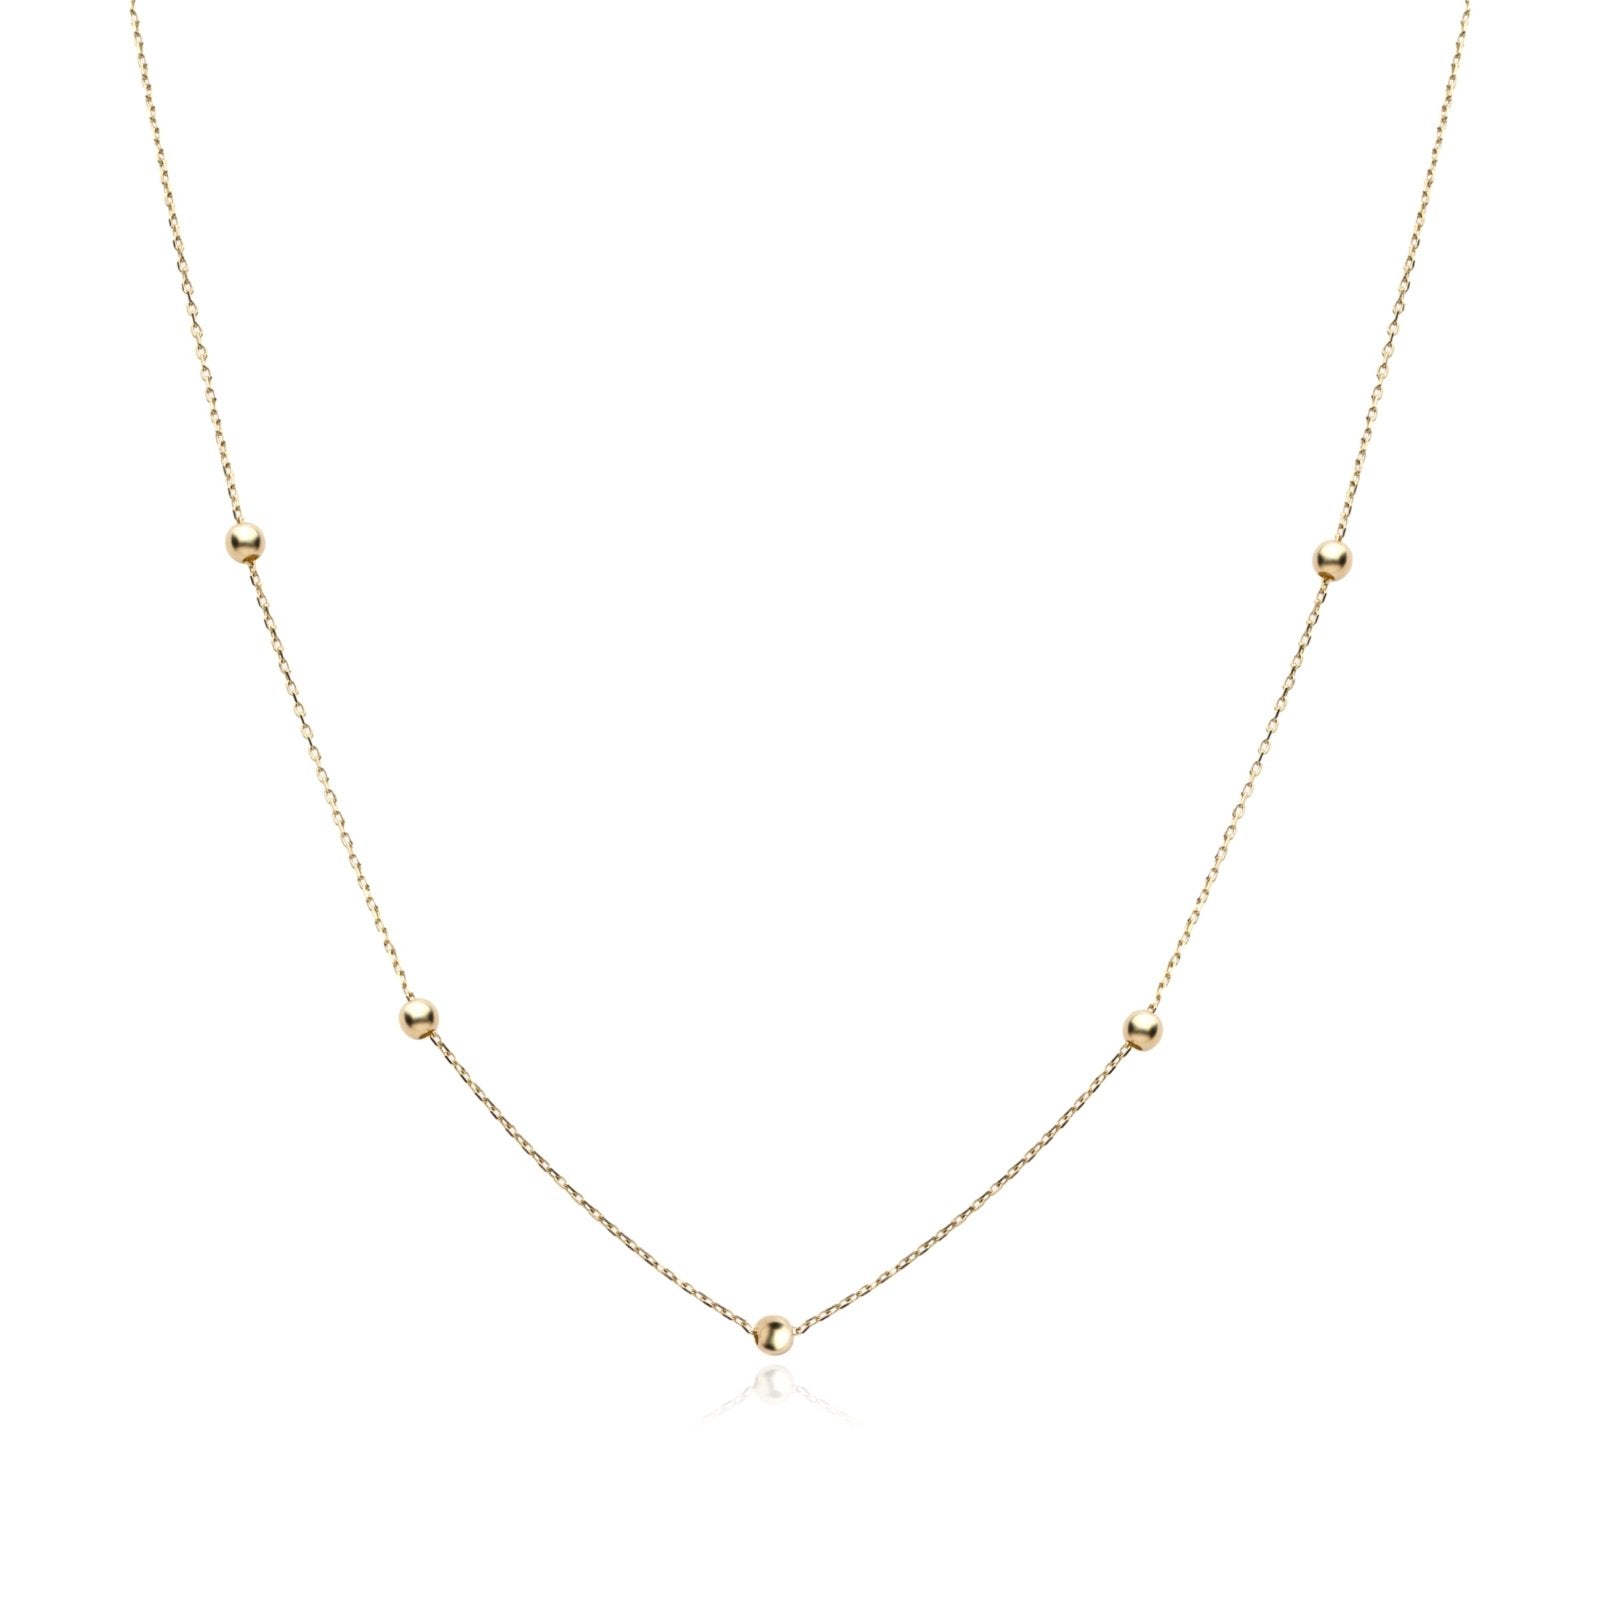 Beaded Station Necklace Necklaces Estella Collection #product_description# 17821 14k Layering Necklace Make Collection #tag4# #tag5# #tag6# #tag7# #tag8# #tag9# #tag10# 14K Yellow Gold 18"